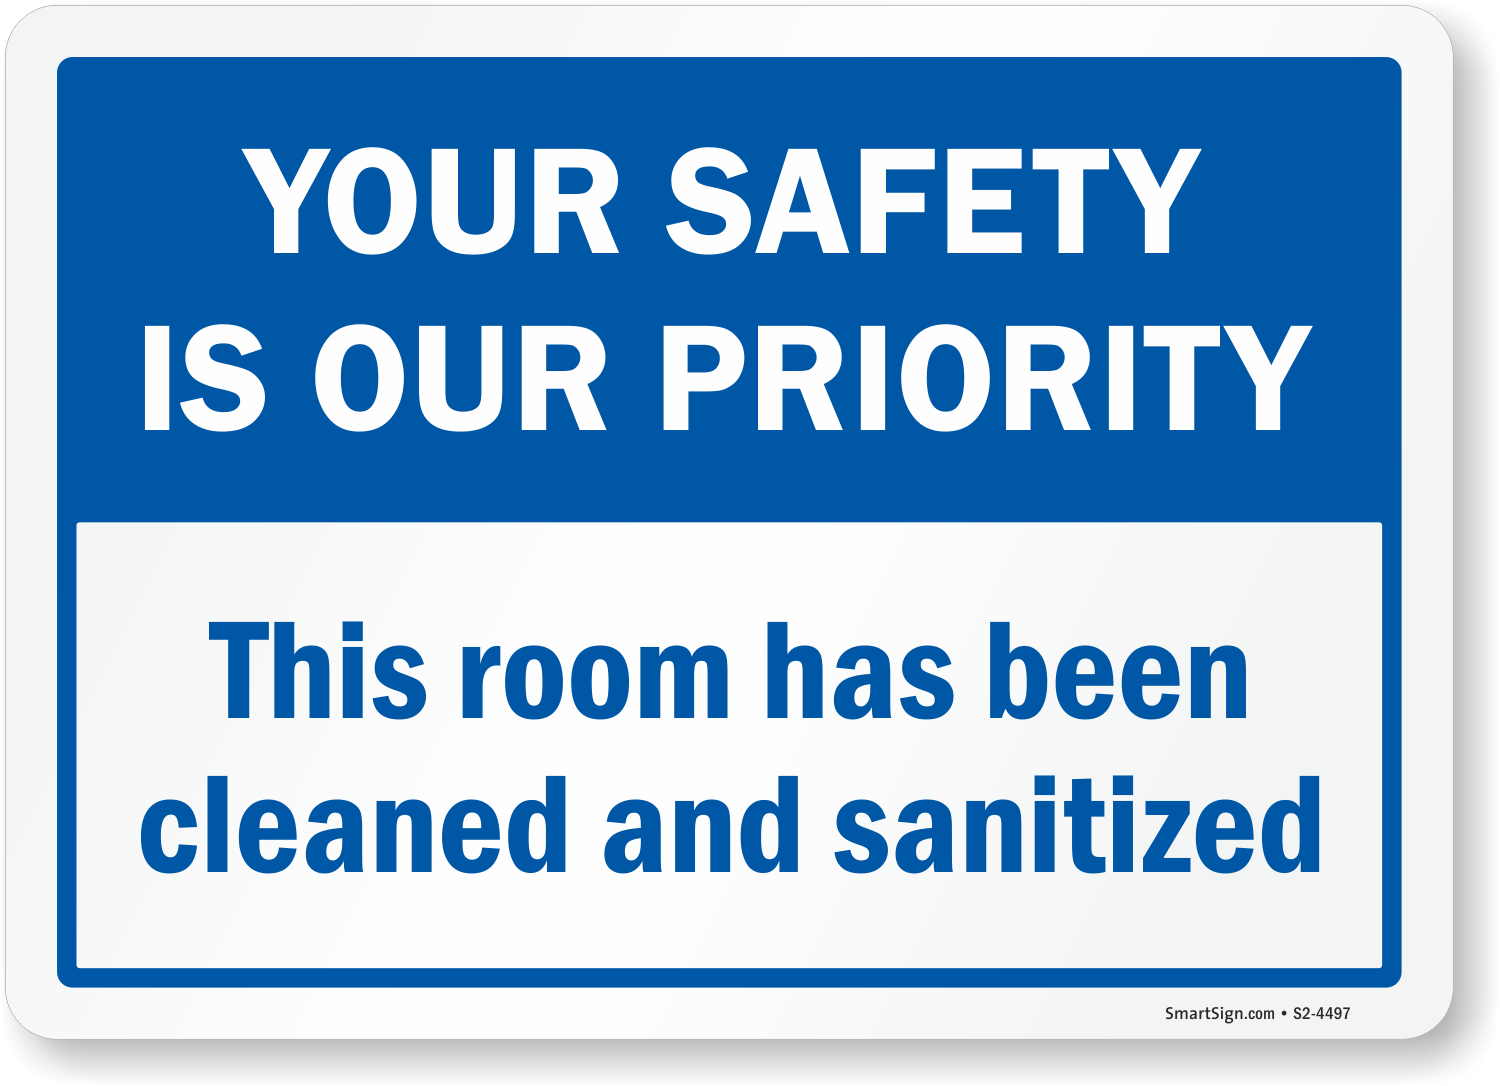 This room clean every. Your Safety is not our problem.